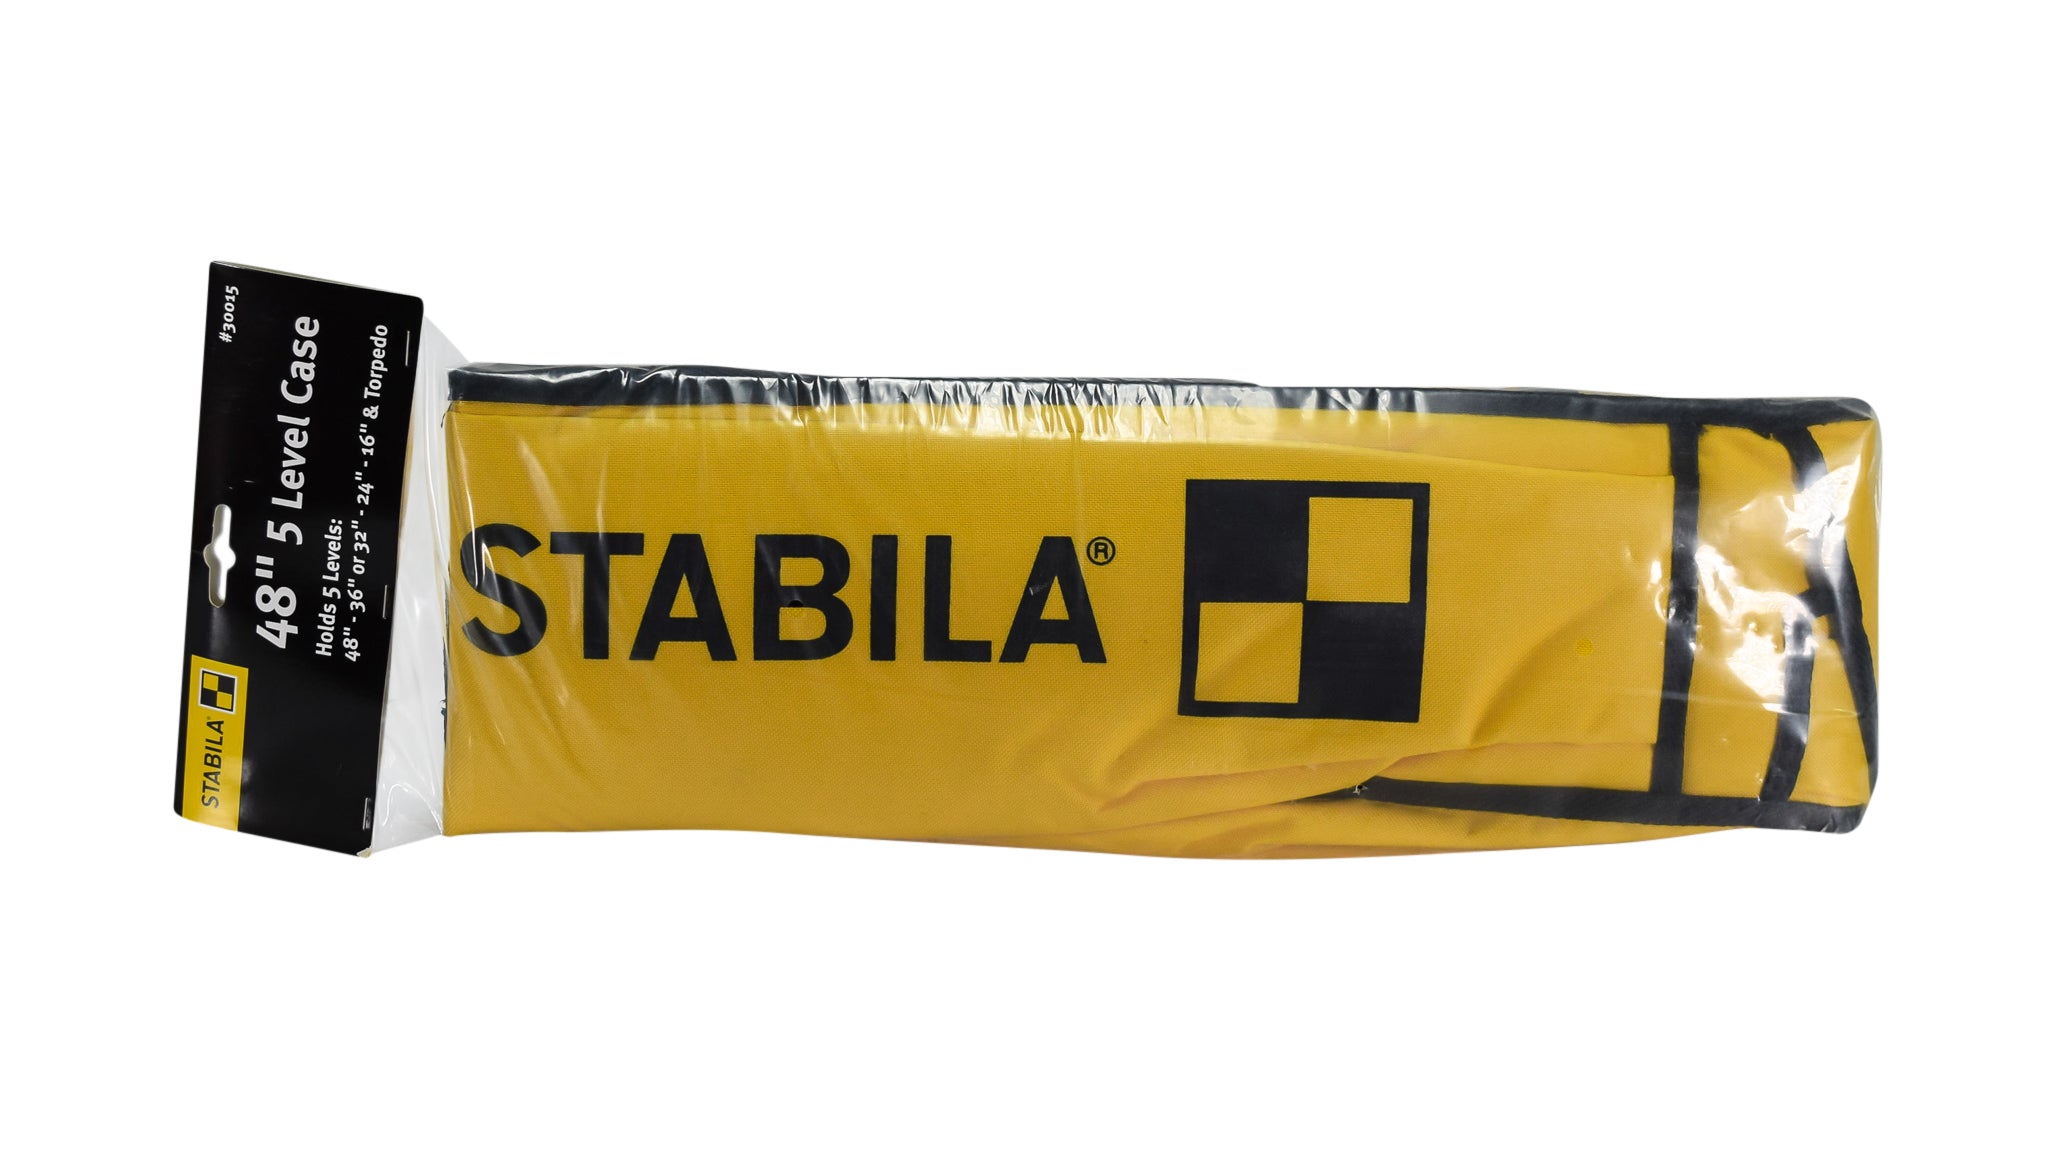 Stabila-30015-5-pocket-case-fits-48-32-24-and-16-and-Torpedo-Levels-image-1